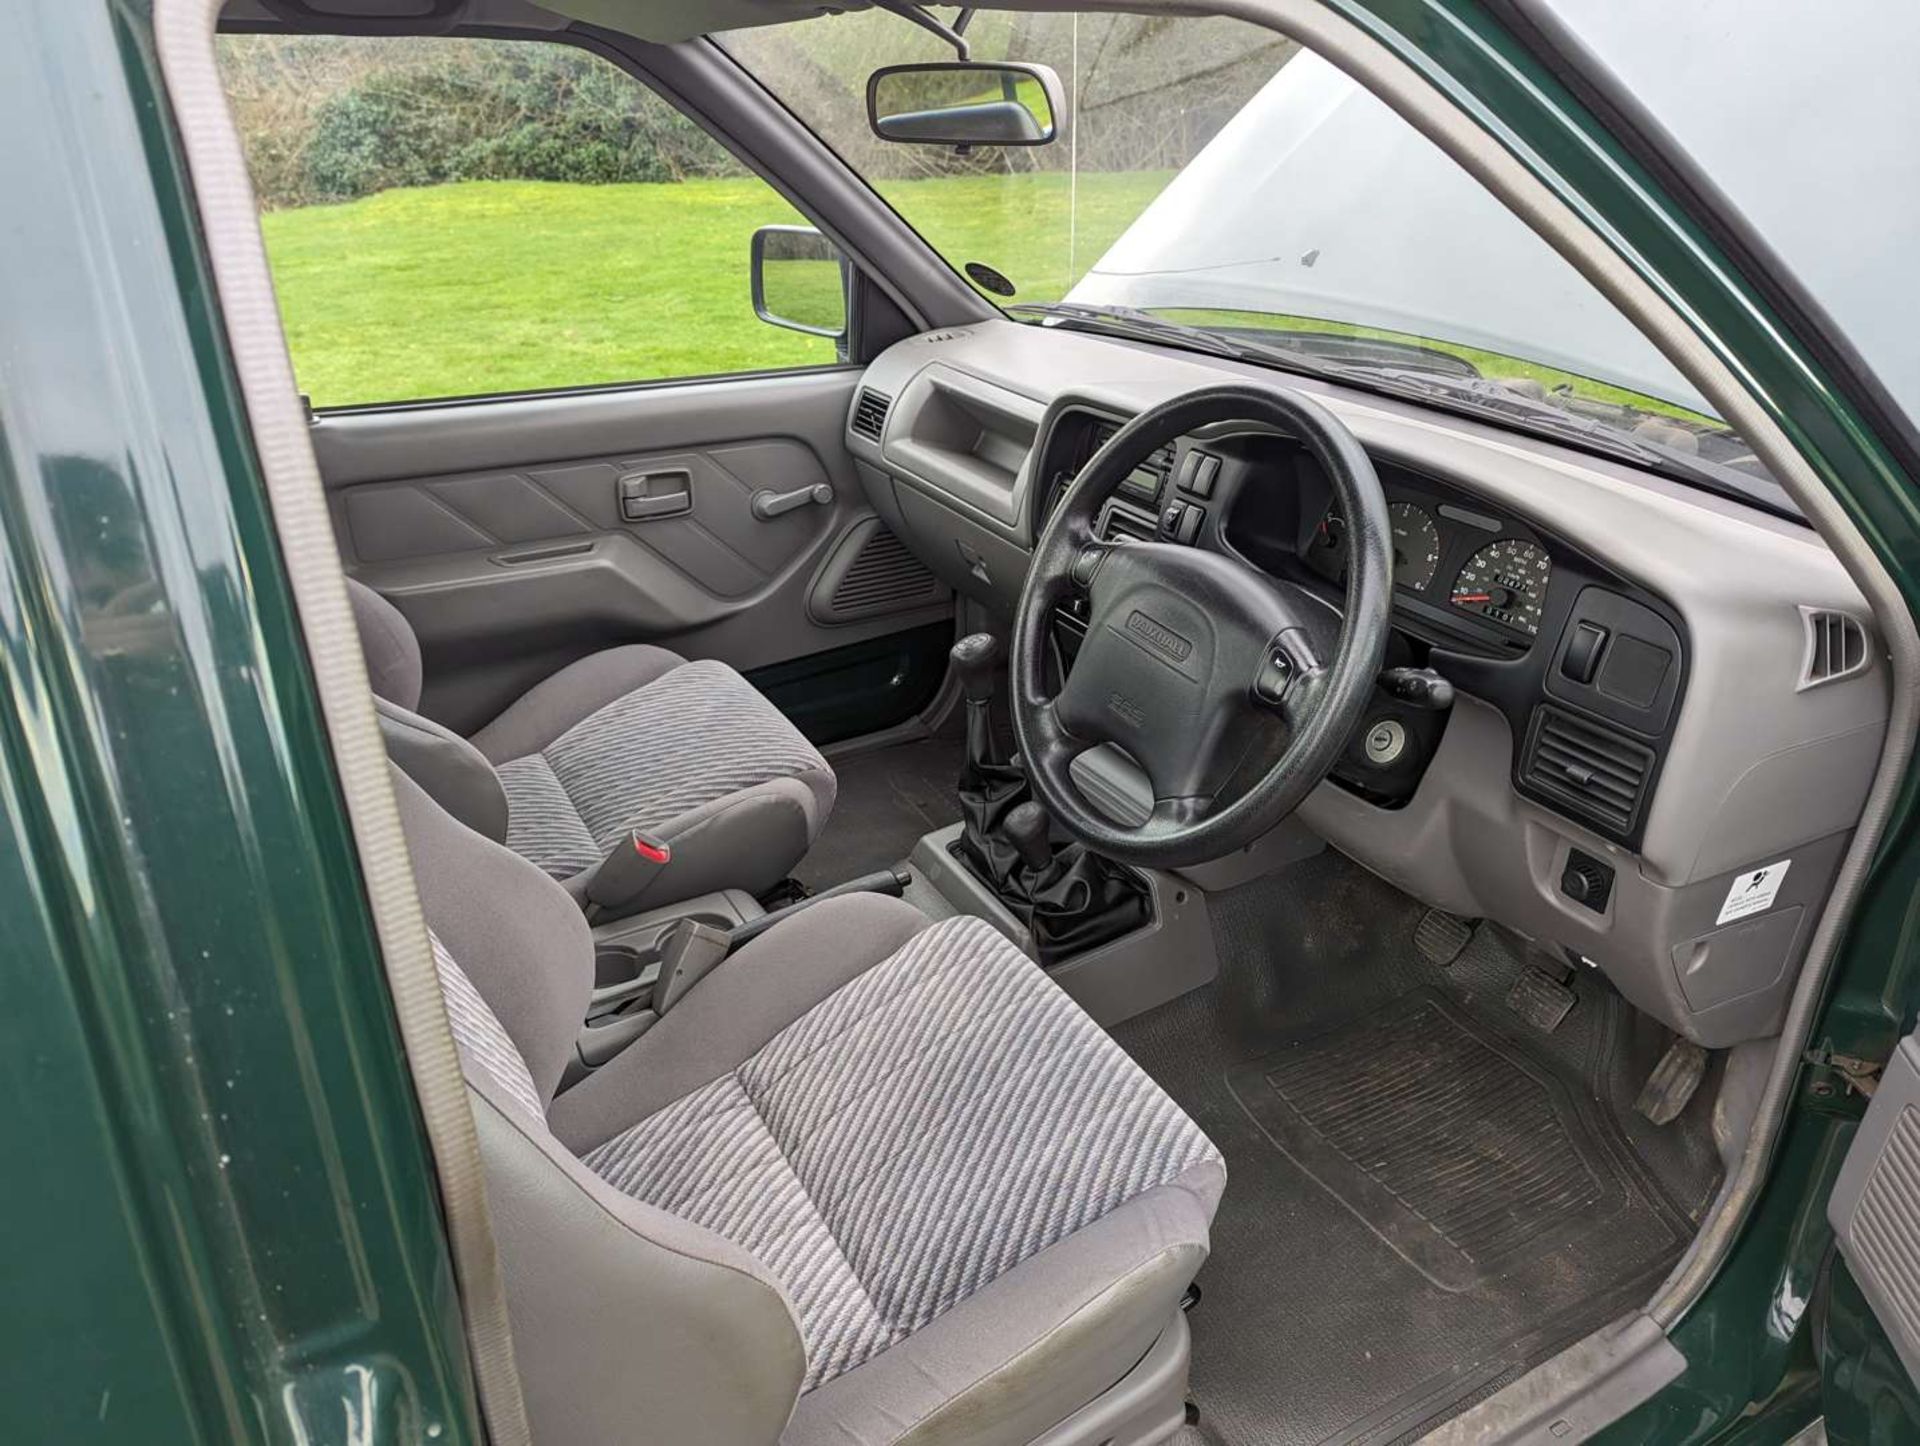 2000 VAUXHALL BRAVA DI 4X4 24,770 MILES FROM NEW - Image 9 of 25